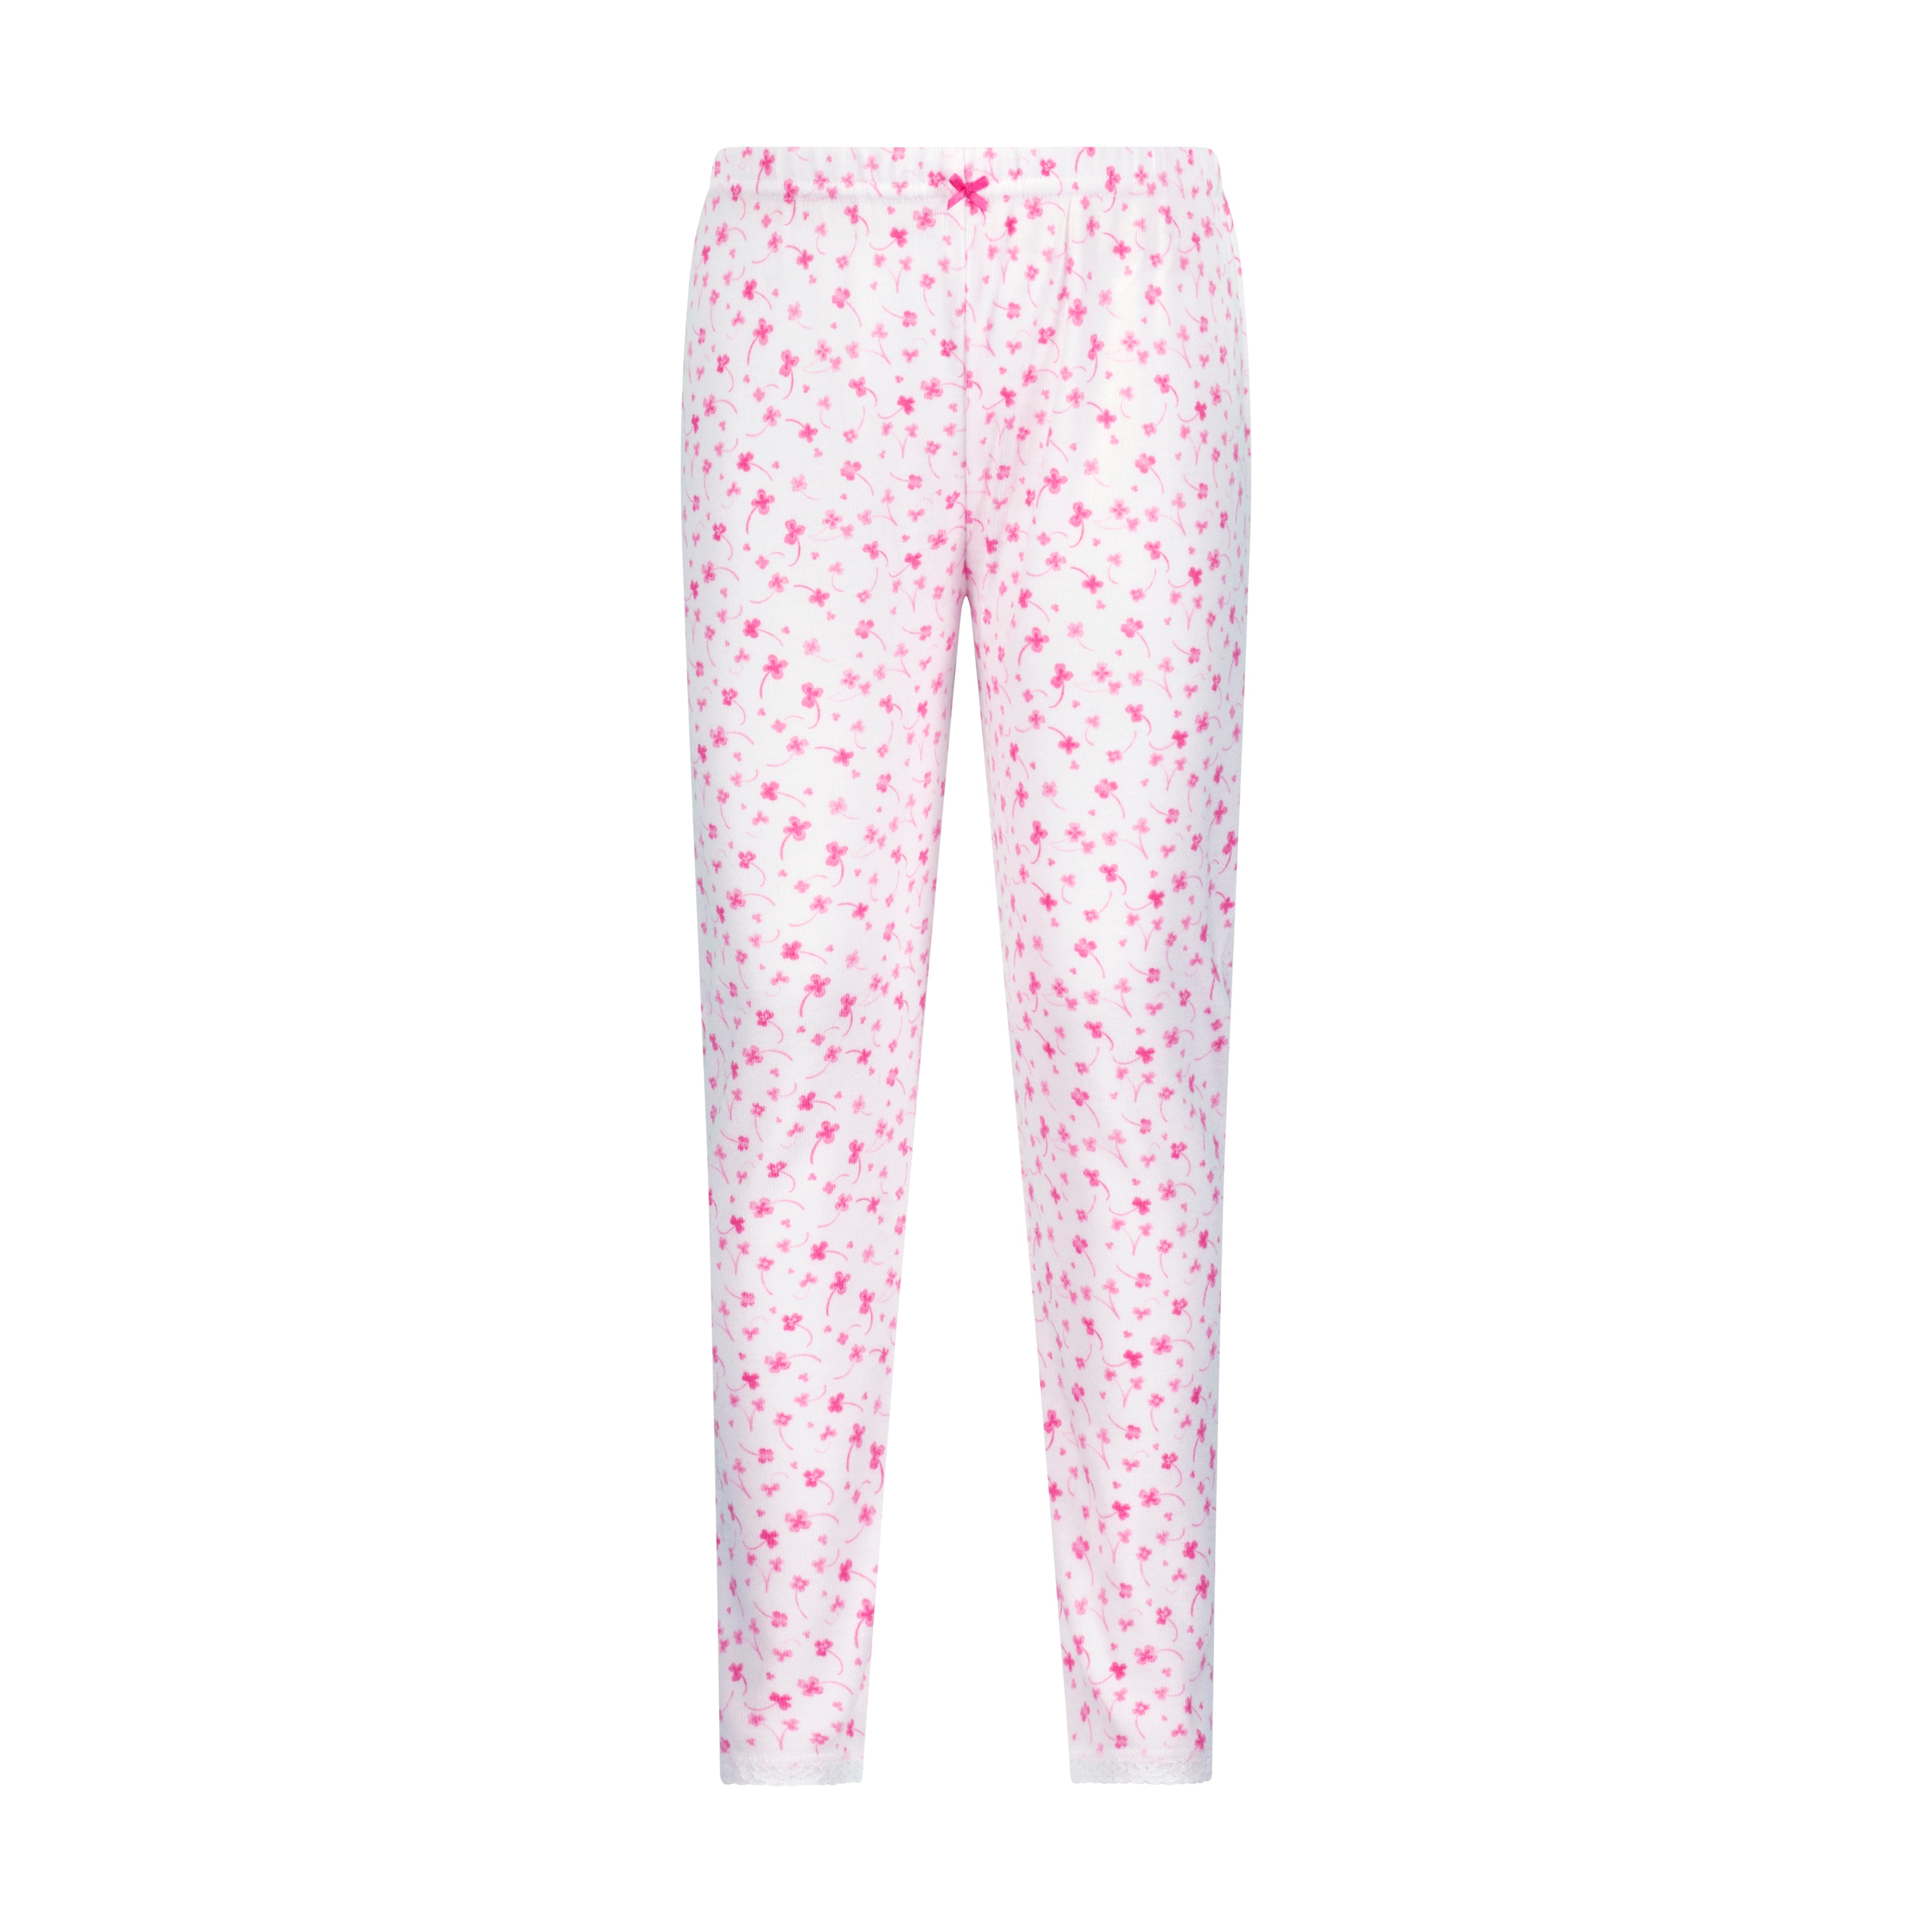 GIRLS PINK CLOVER Print PANT w Lace